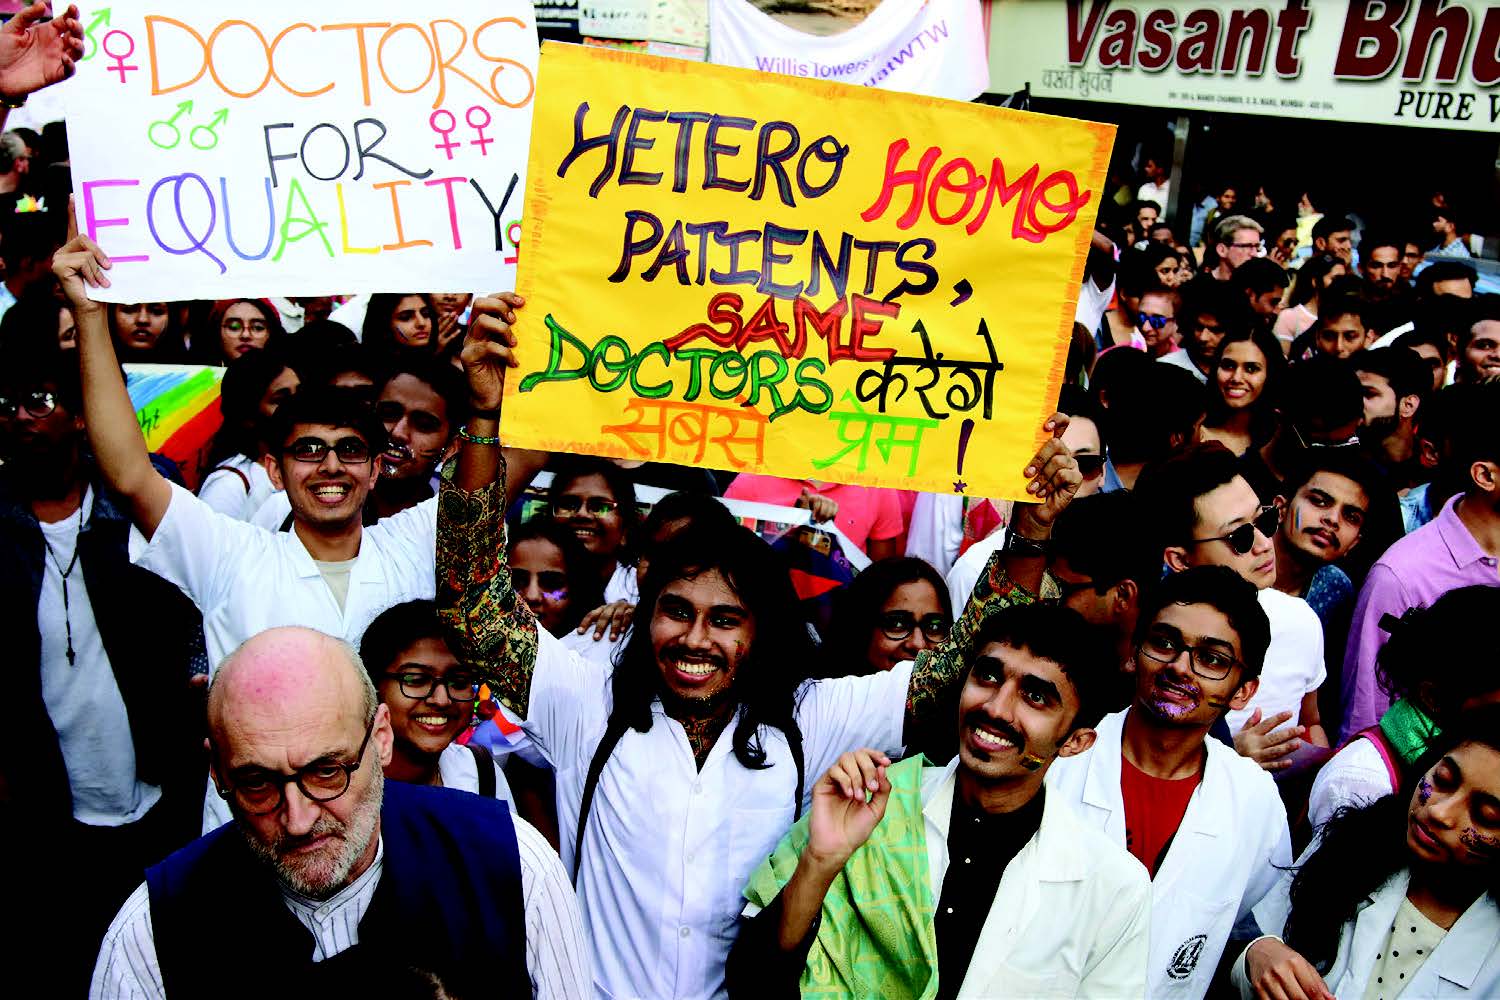 A crowd of people hold up signs; one says "Hetero Homo patients, same doctors."